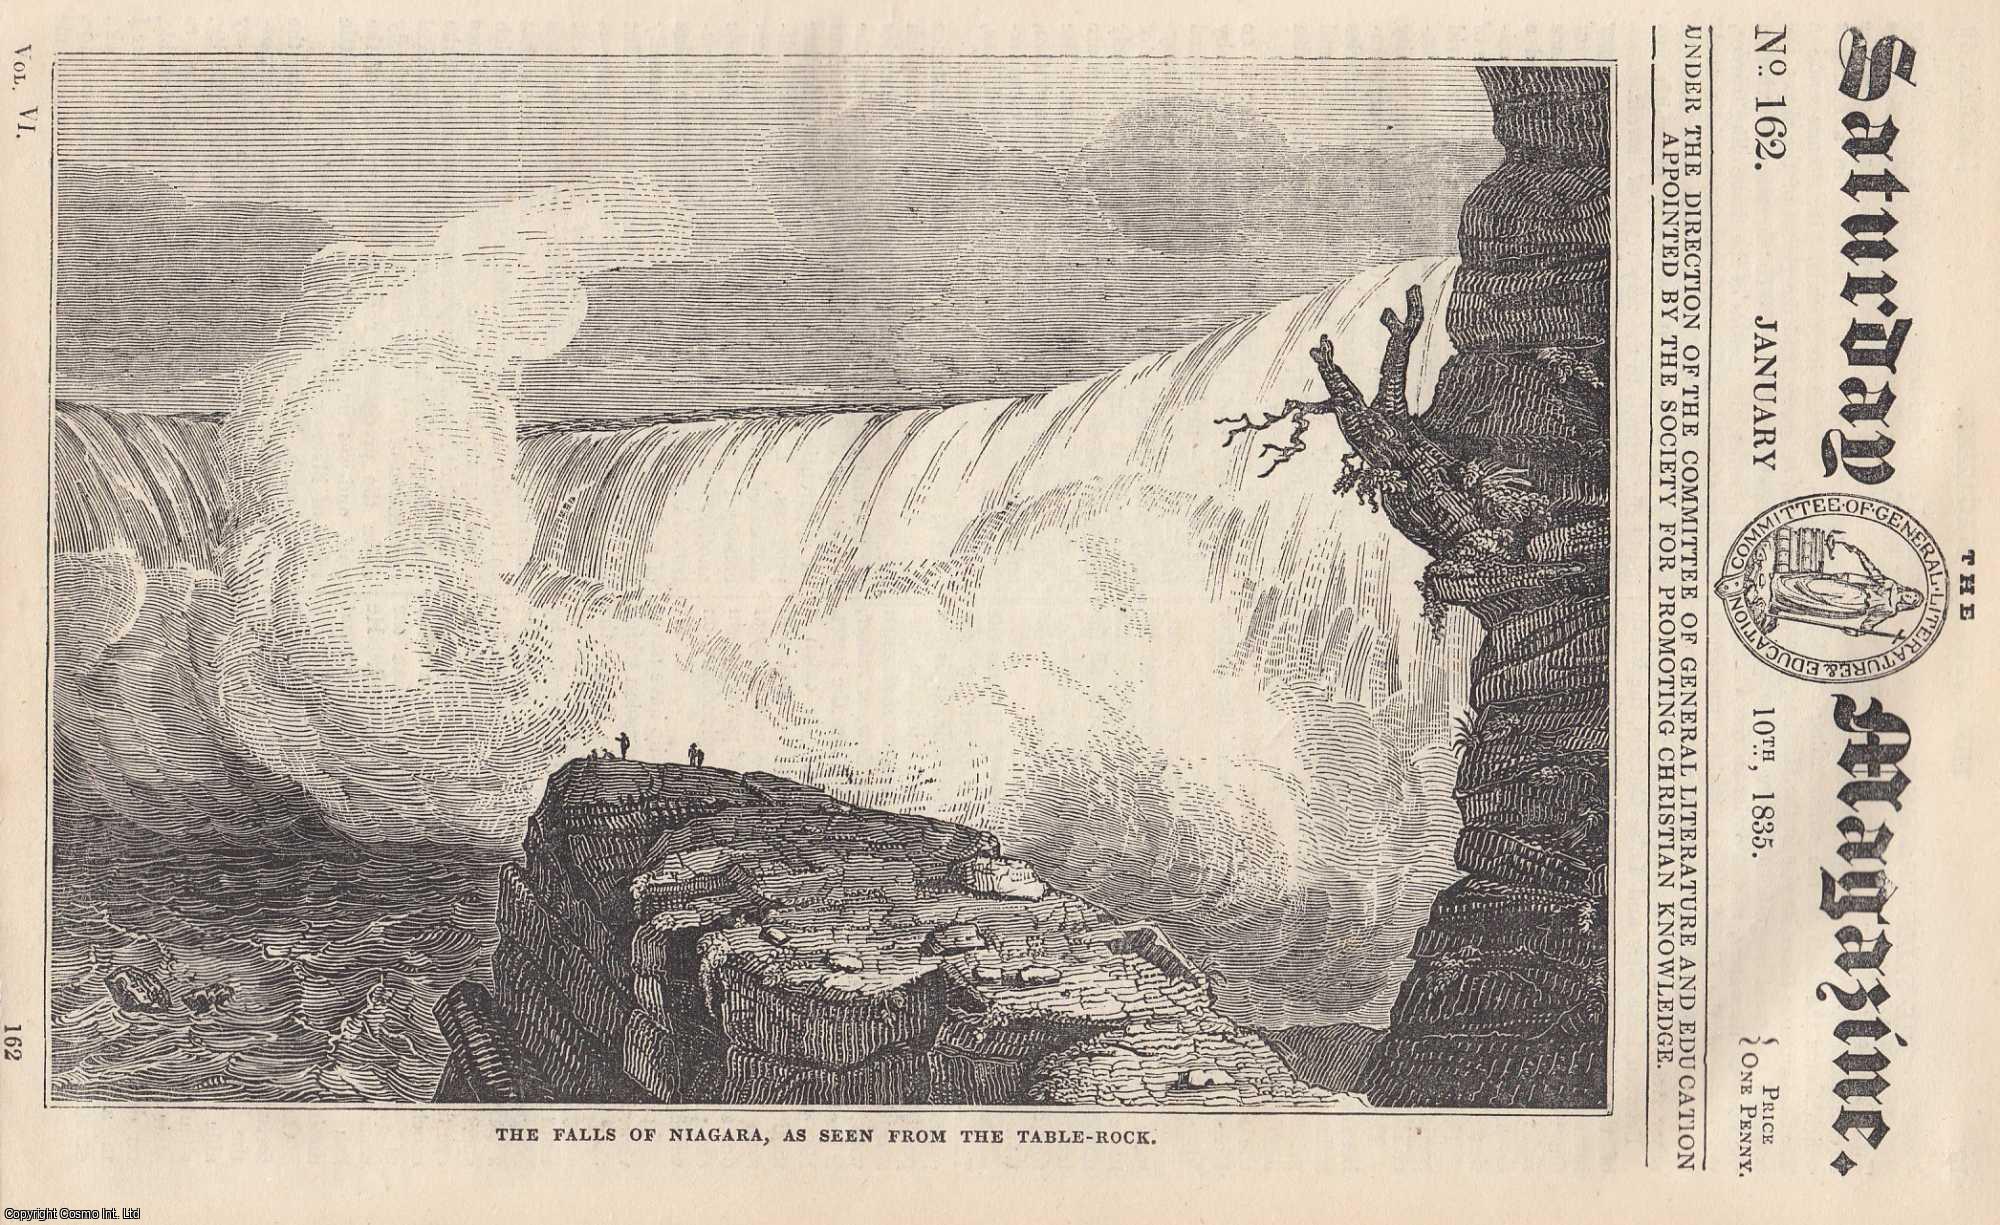 --- - The Falls of Niagara, as Seen from Table Rock; The Manufacture of a Beaver-Hat; The Royal Palace at Eltham in Kent, etc. Issue No. 162, January 10th. A complete rare weekly issue of the Saturday Magazine, 1835.